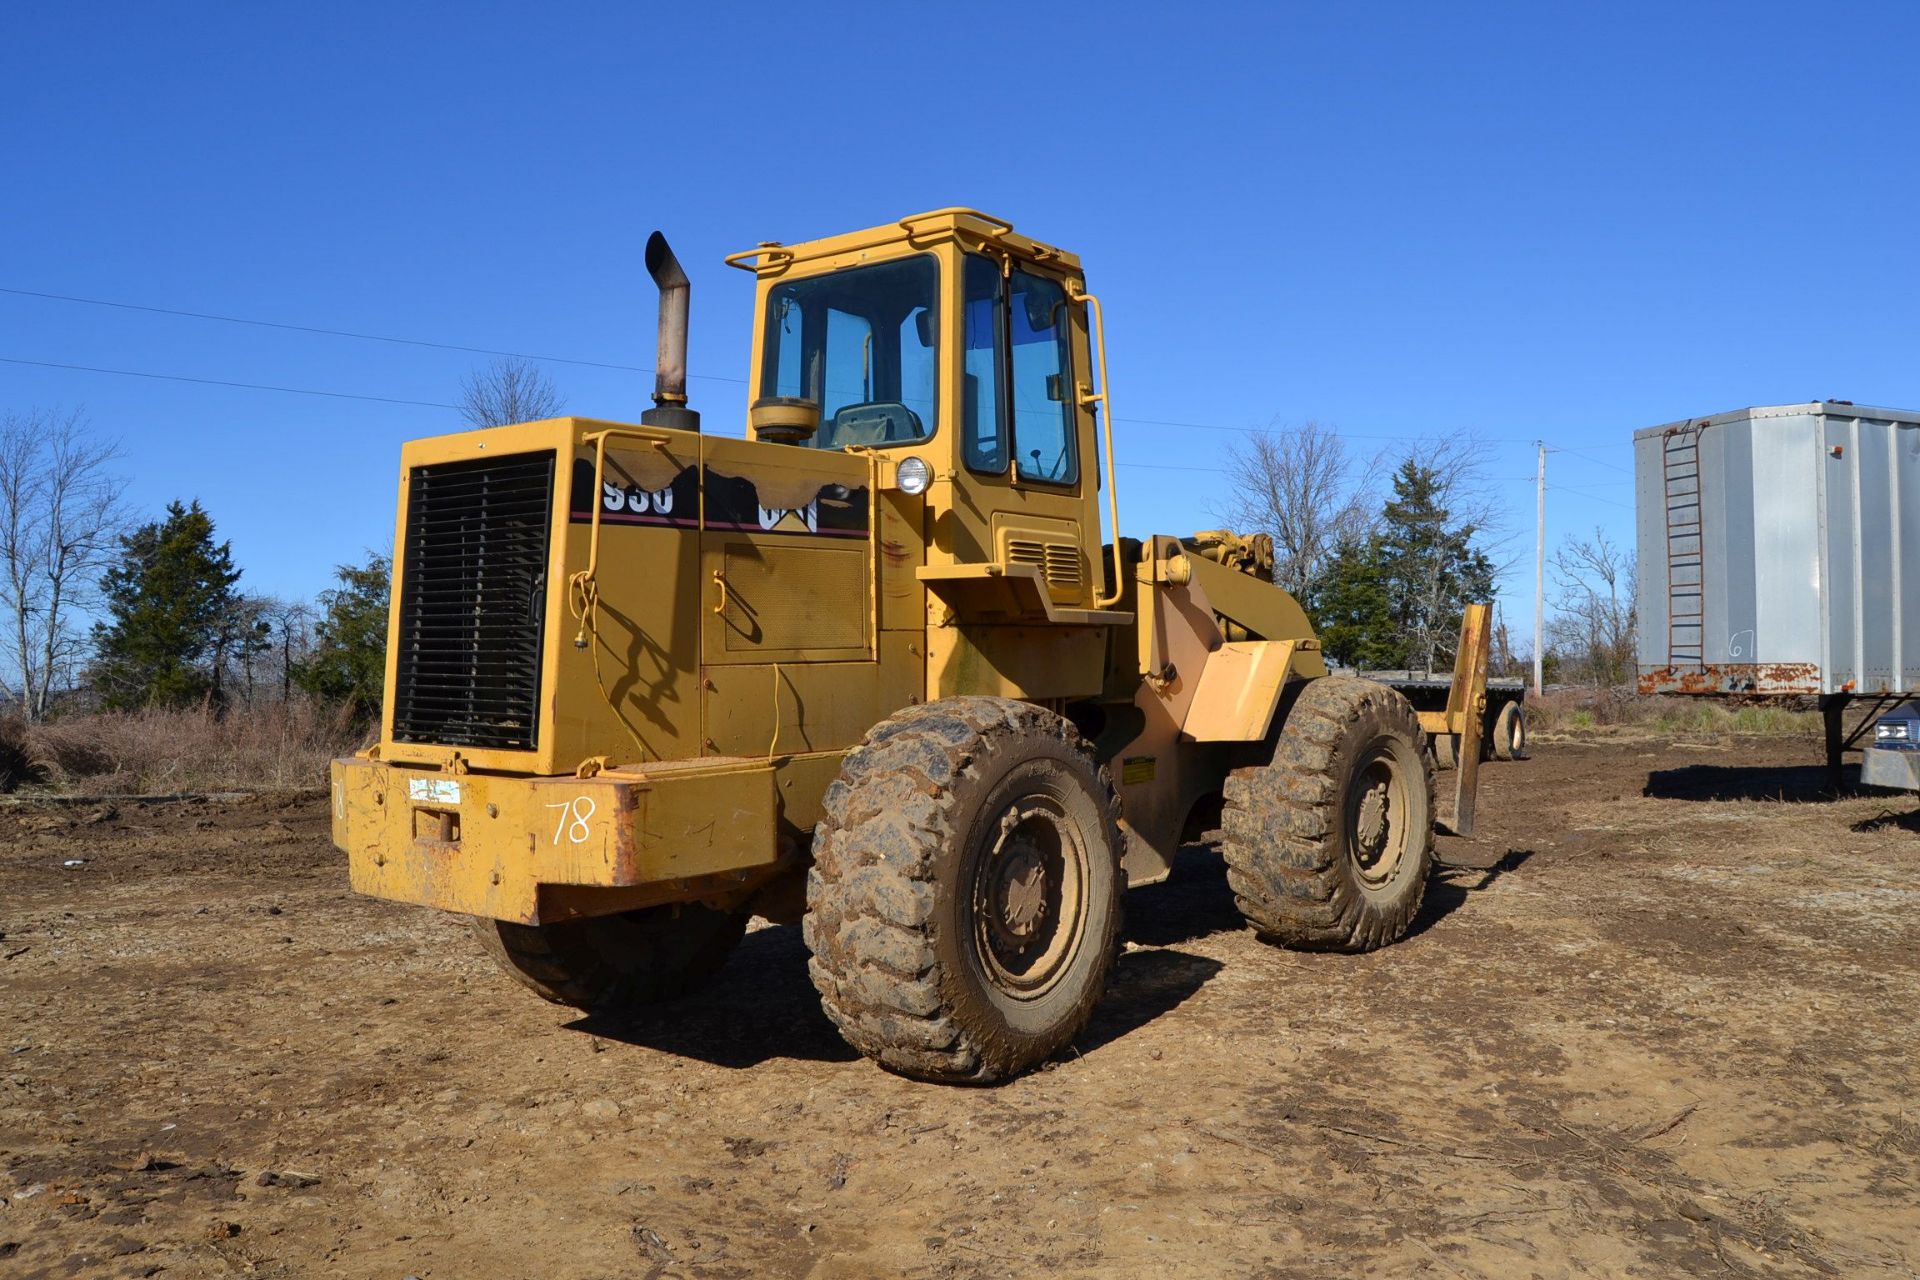 CAT 936 ARTICULATING LOADER W/ ENCLOSED CAB W/ LUMBER FORKS W. 20.5X25 RUB 19,160 HOURS